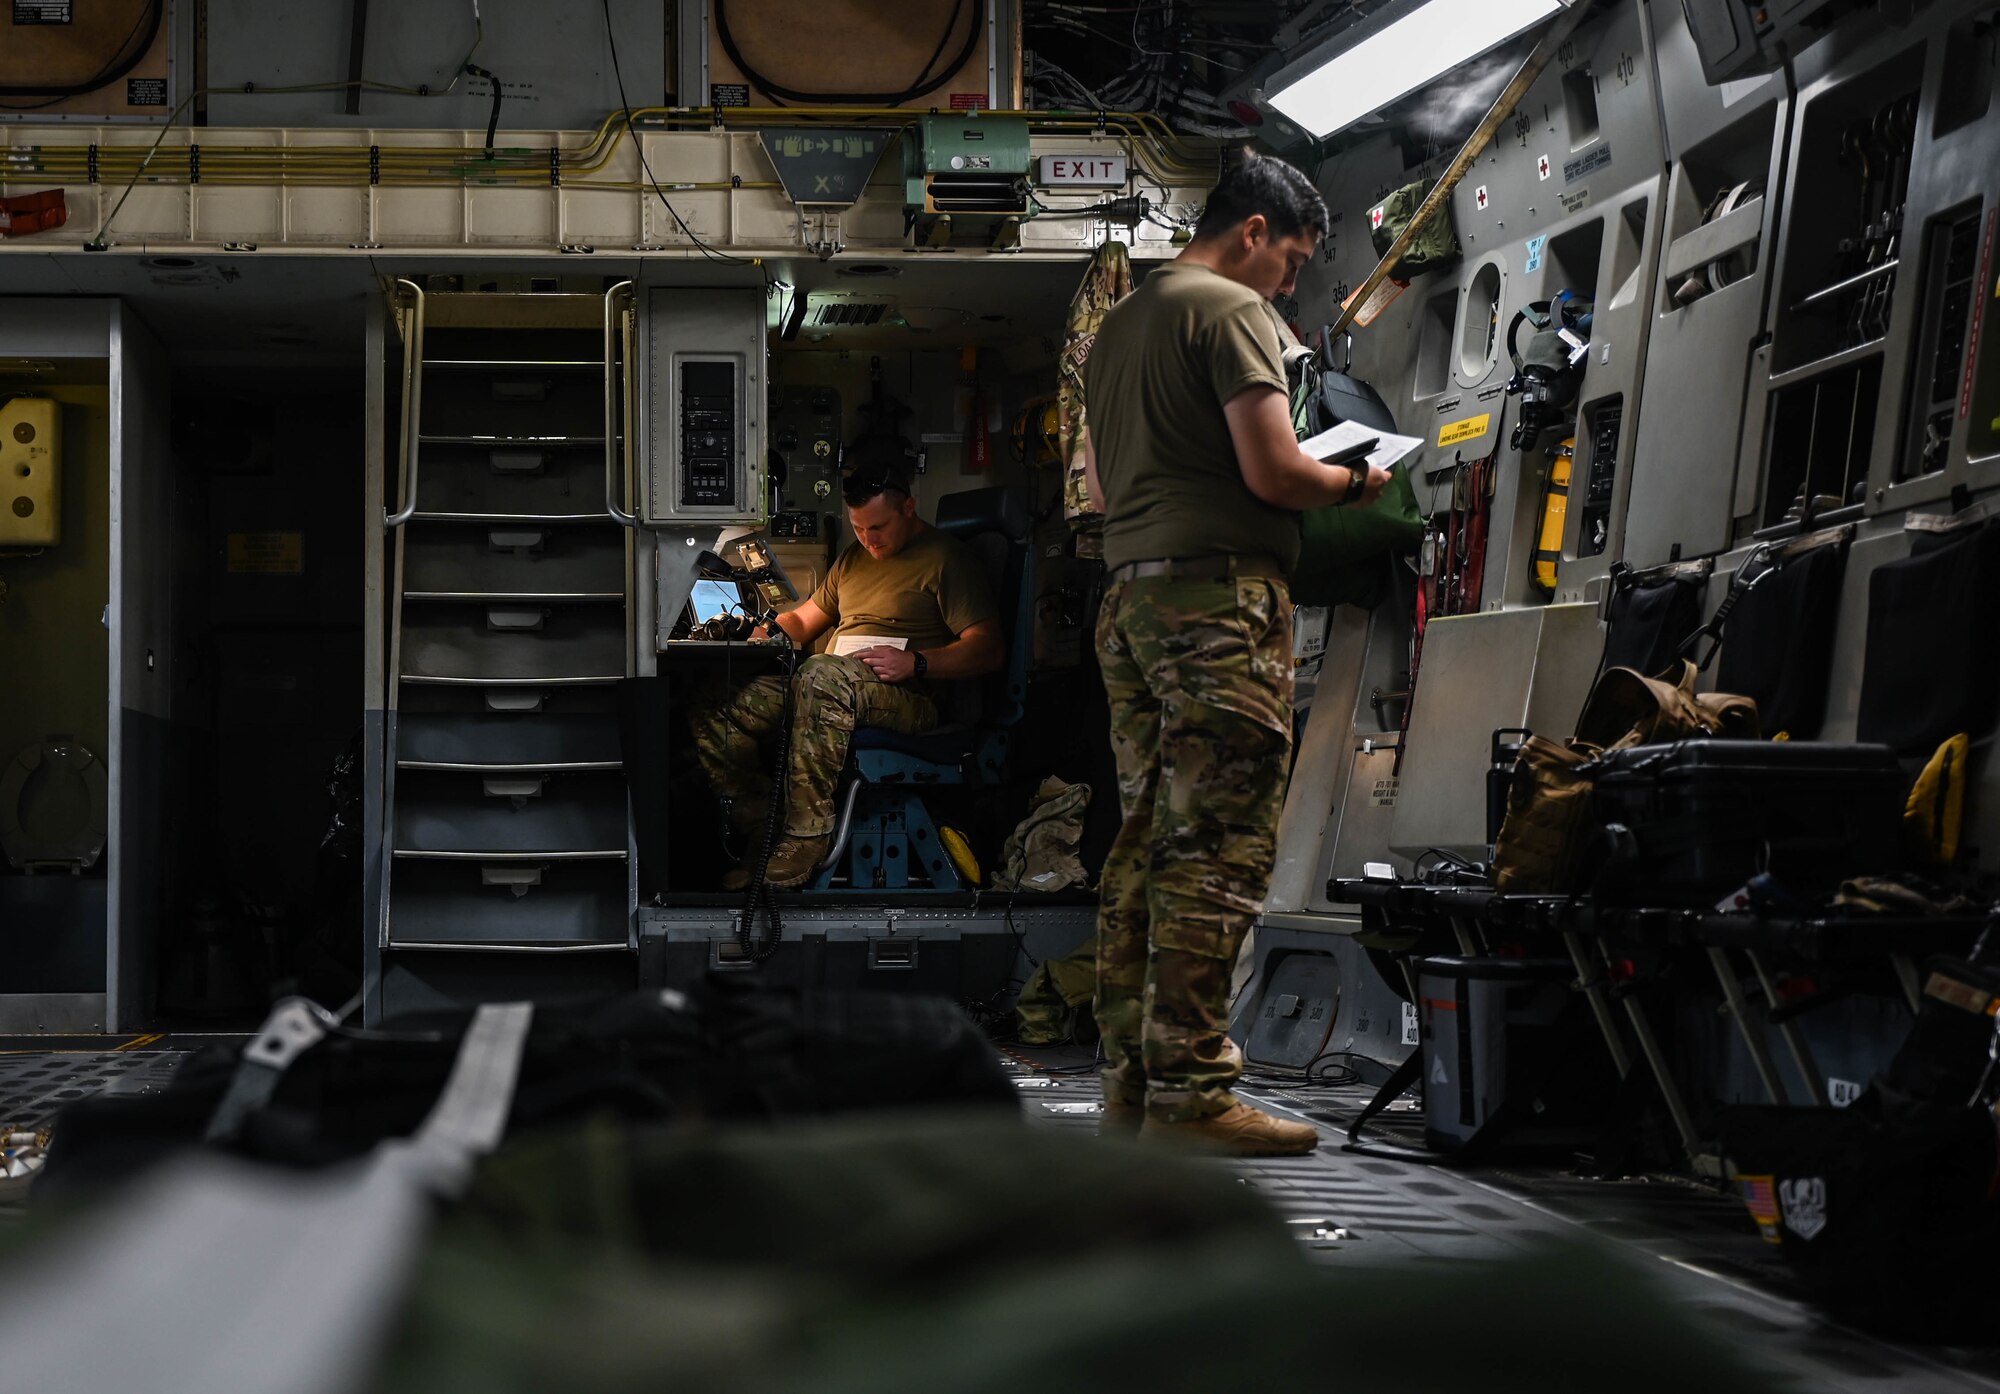 Tech. Sgt. William Seyler, 535th Airlift Squadron loadmaster, and Airman 1st Class Layne Fitzpatrick, 535th AS loadmaster, perform preflight checks in a C-17A Globemaster III at Andersen Air Force Base, Guam, Nov. 14, 2021. The Joint Base Pearl Harbor-Hickam, Hawaii, aircrew participated in joint training operations alongside two Royal Australian Air Force C-17s, increasing airframe interoperability between the two allies. (U.S. Air Force photo by Staff Sgt. Alan Ricker)